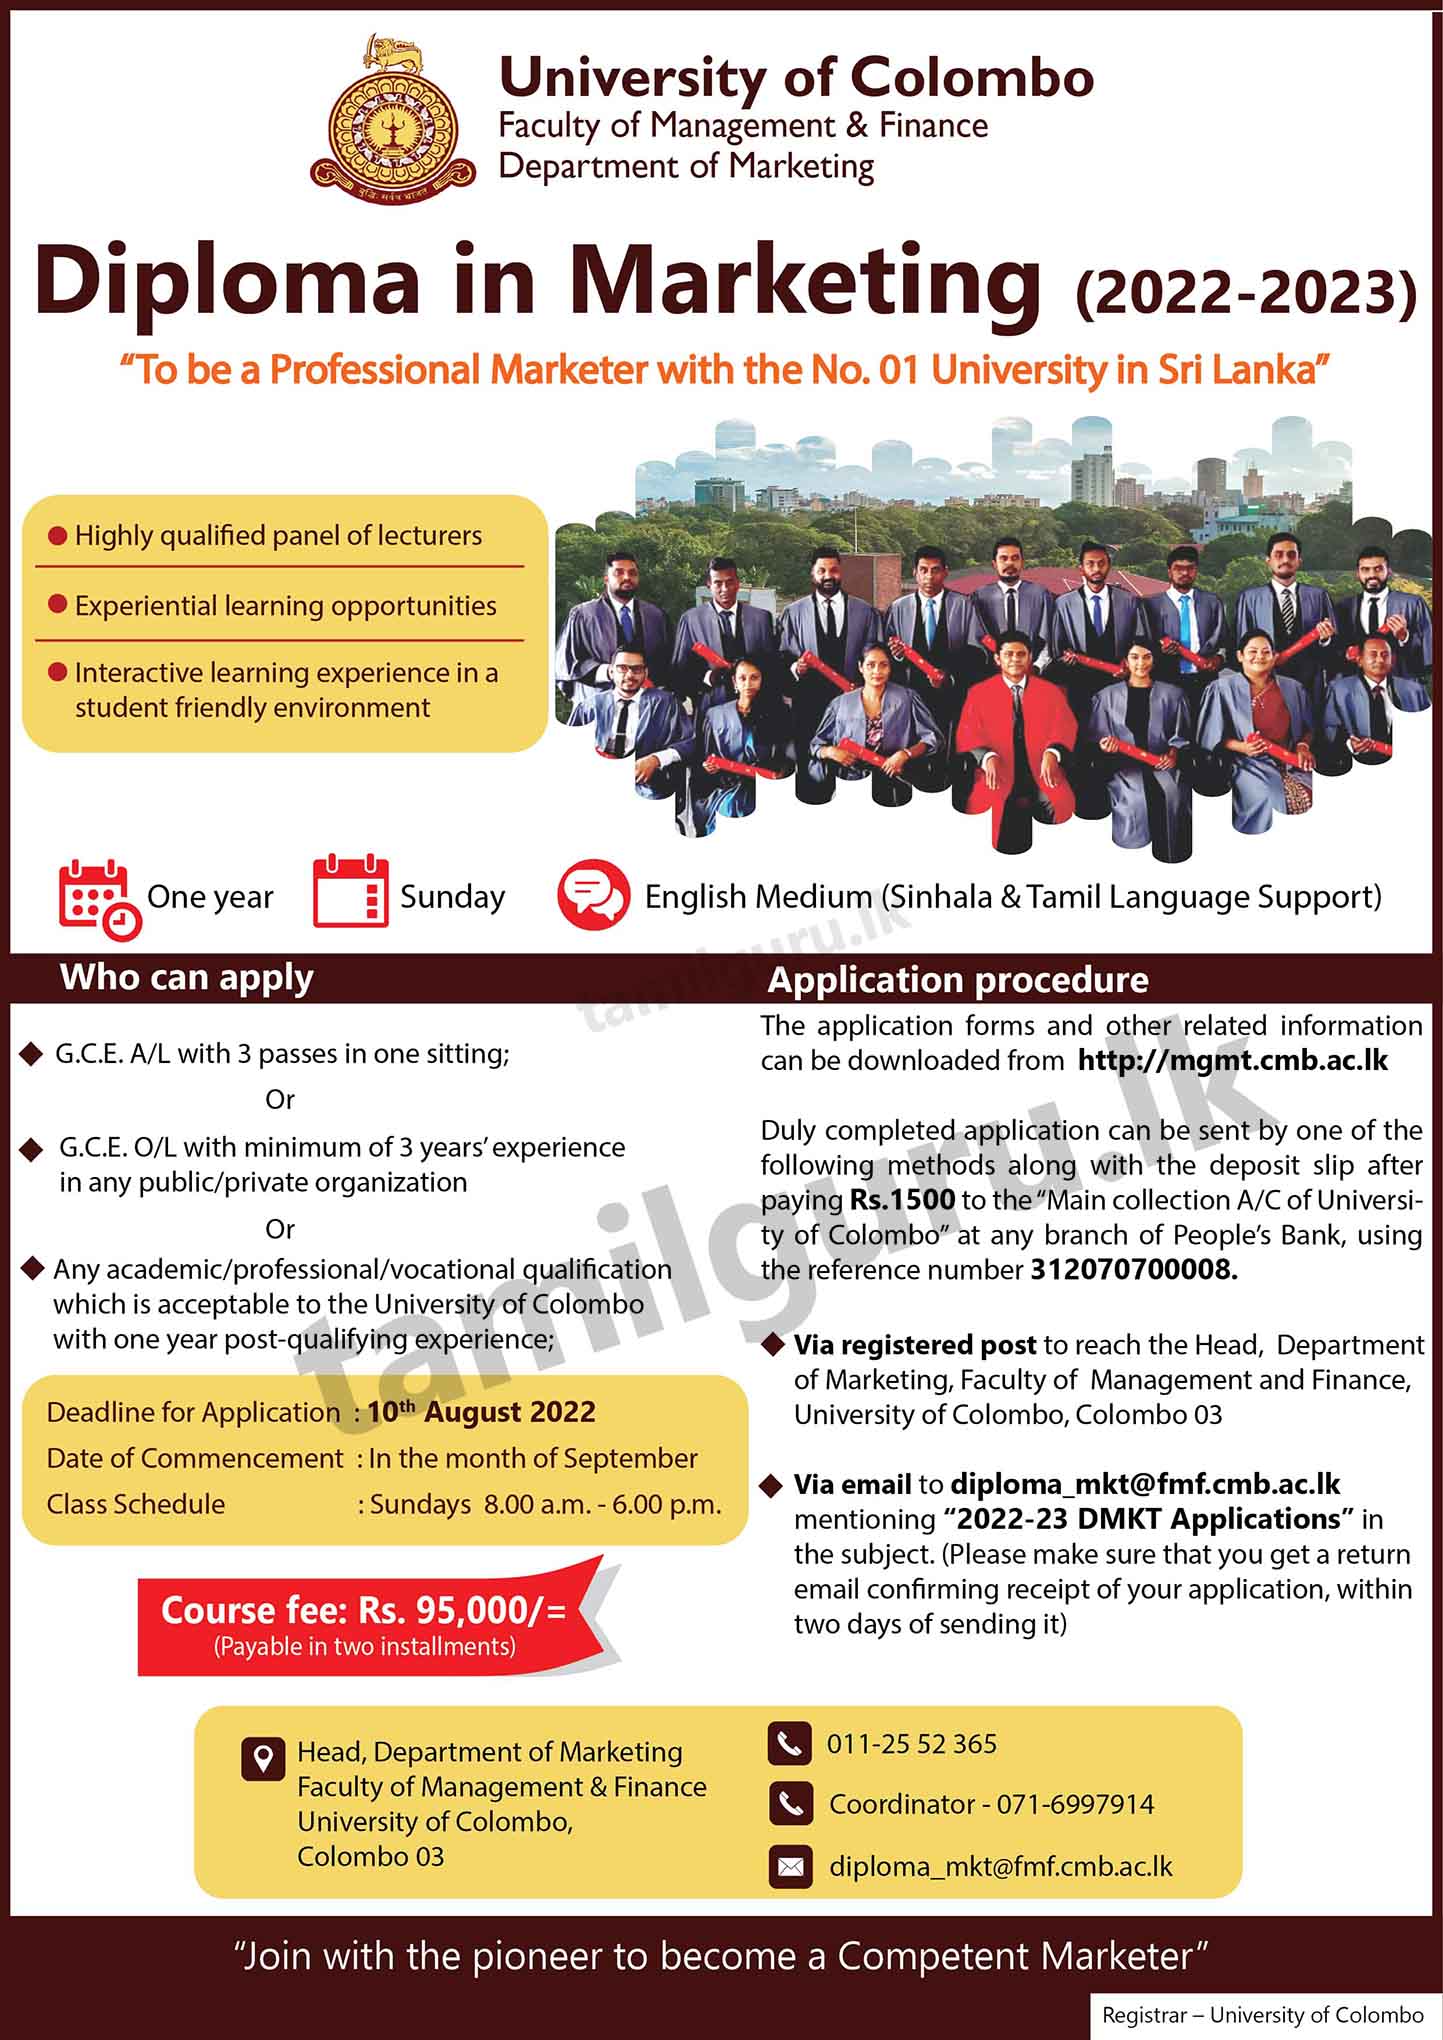 Diploma in Marketing (Course) 2022/2023 - University of Colombo